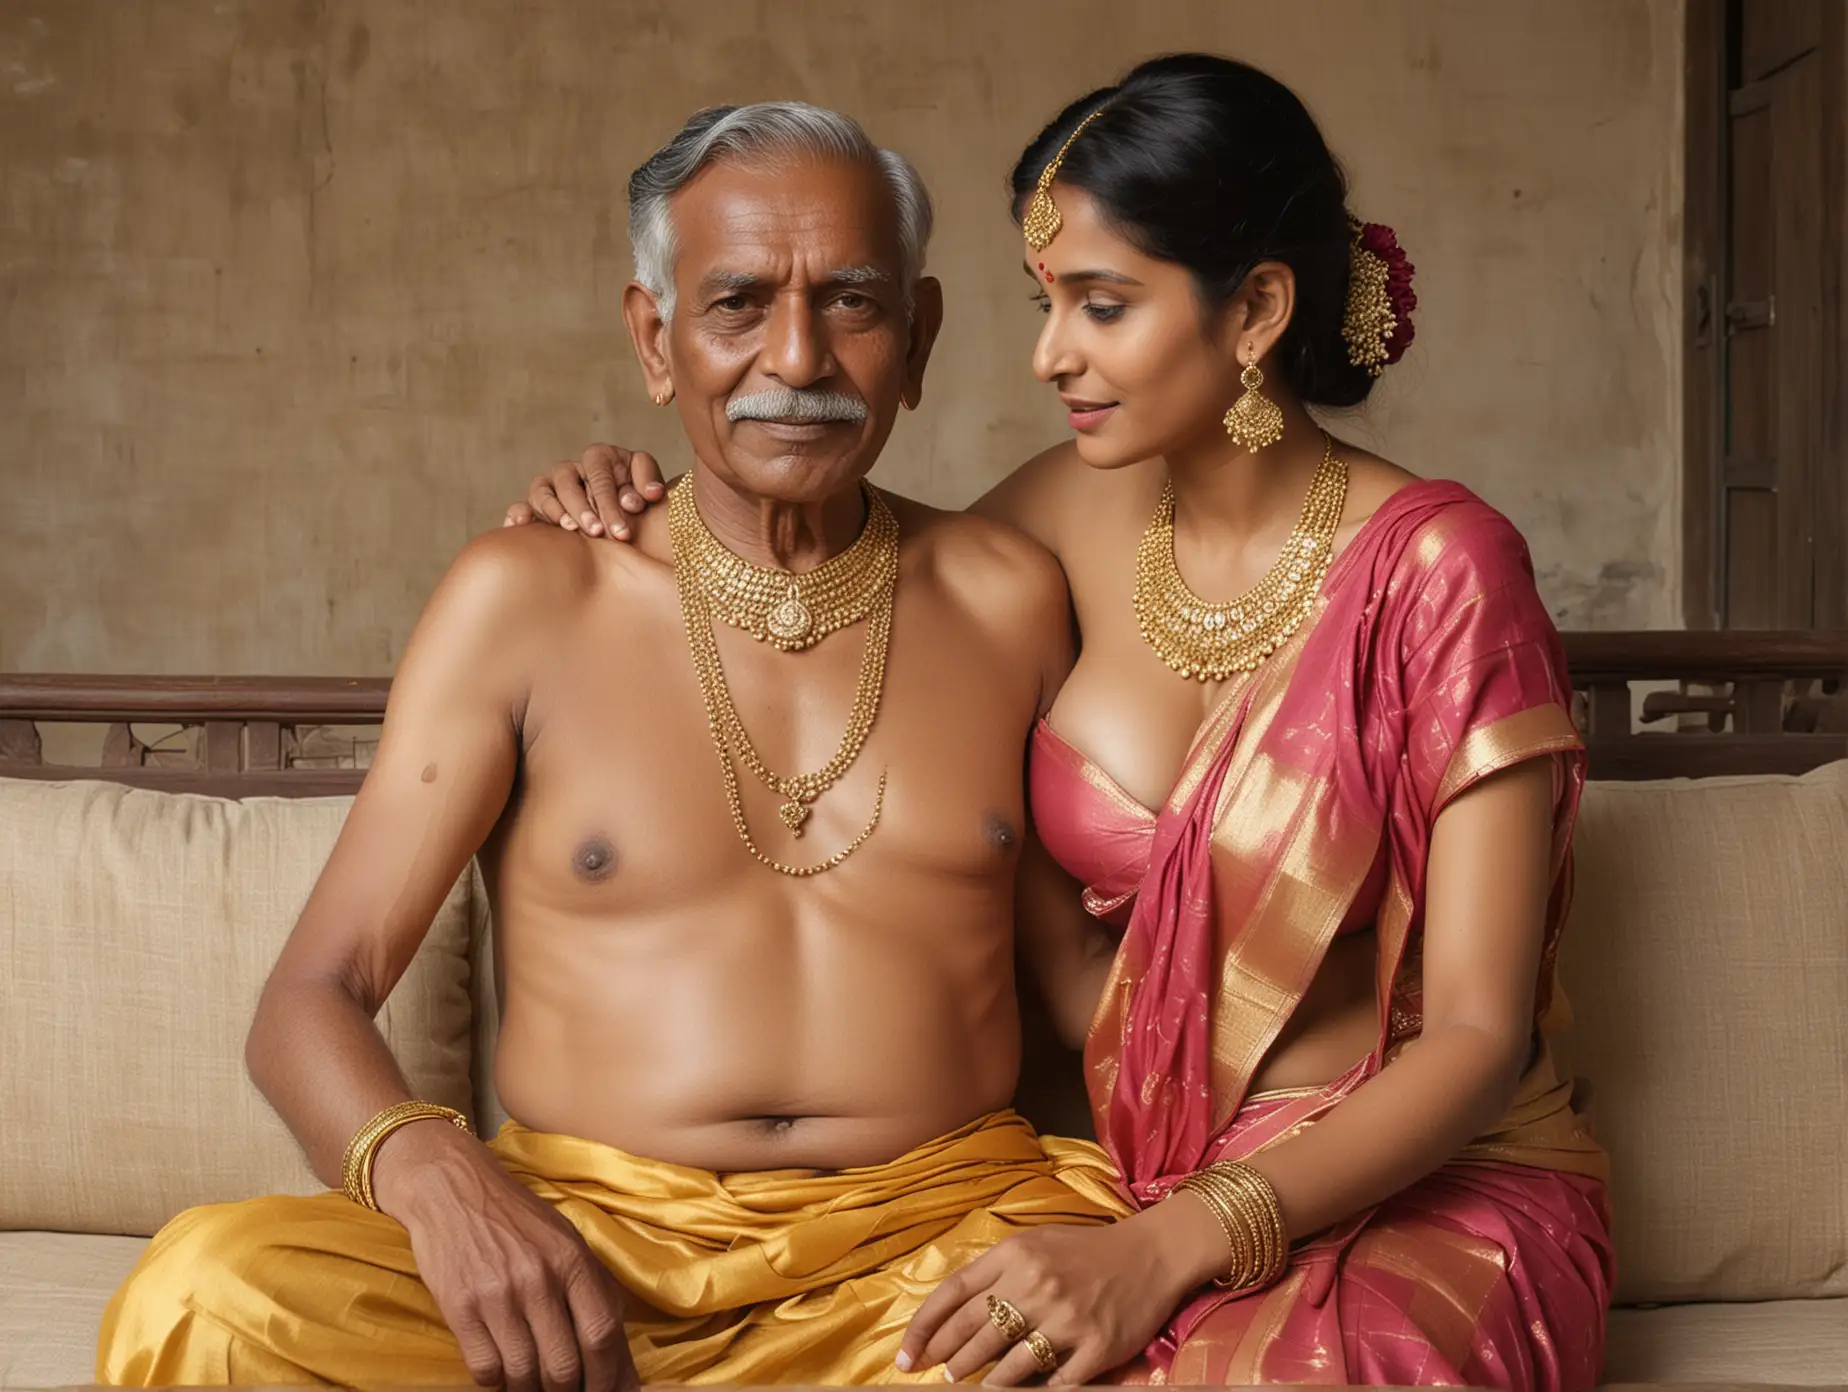 a large round breast full naked Indian woman wearing sari and gold jewelries sitting on lap of old man